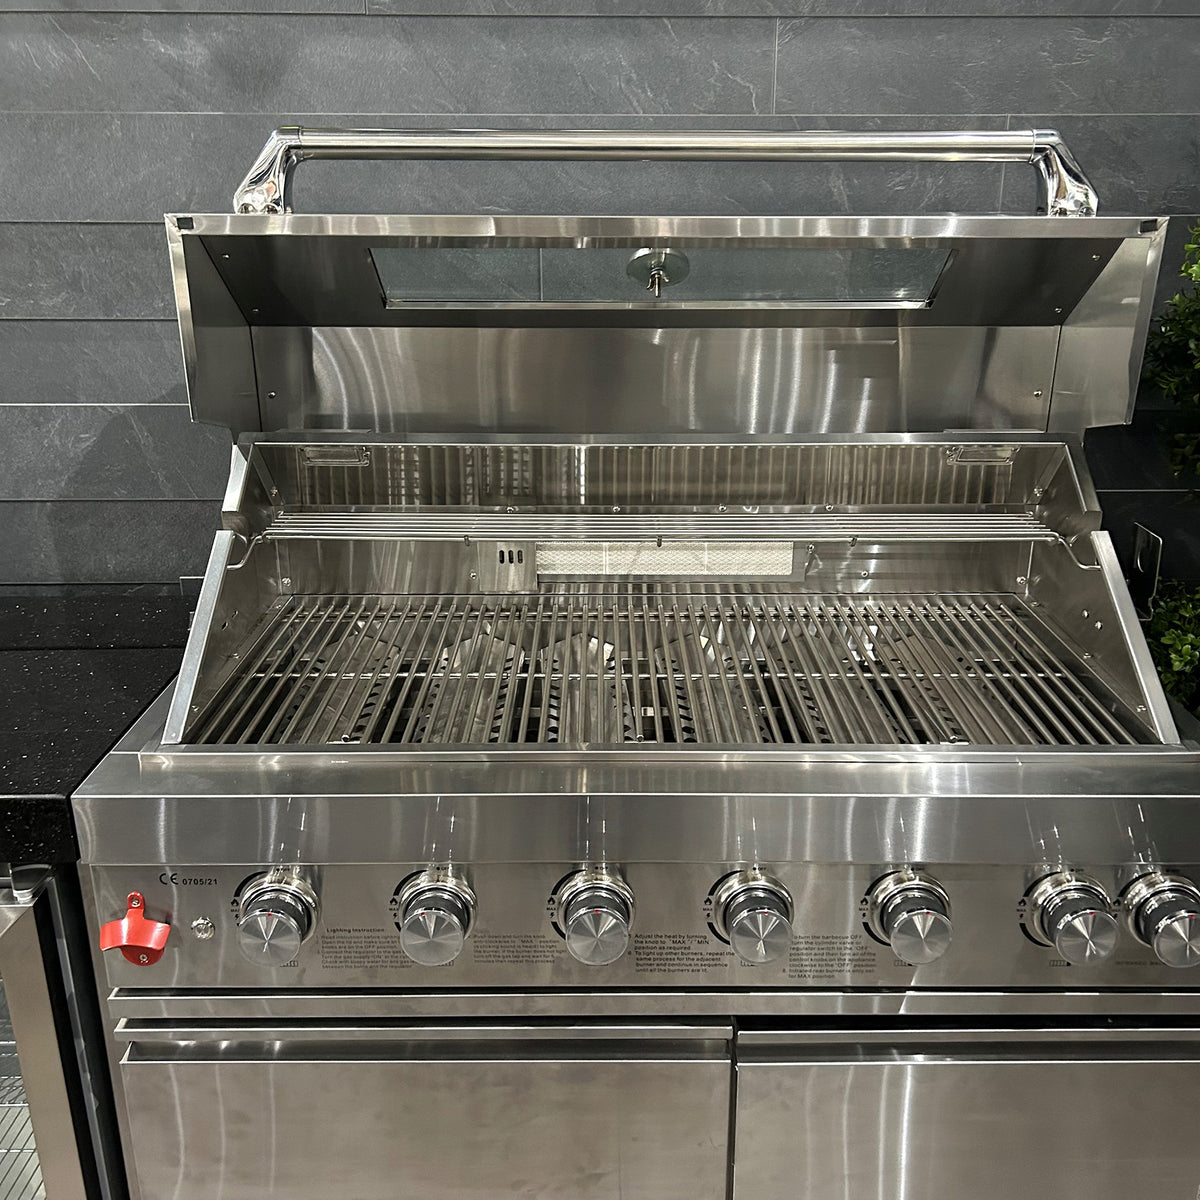 Ex Display Draco Grills 6 Burner Stainless Steel Outdoor Kitchen with Sink and Fridge Unit and Double Cupboard